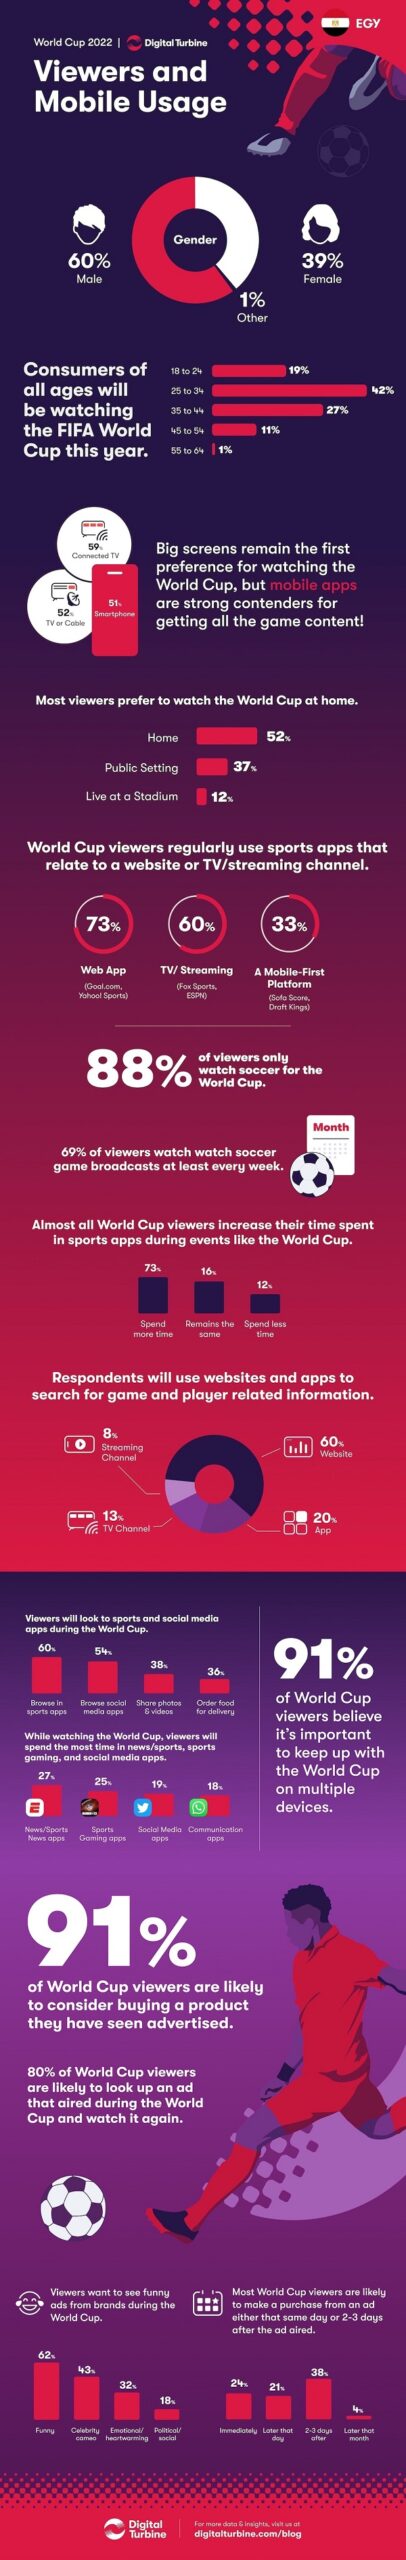 EGYPT - WORLD CUP INFOGRAPHIC 